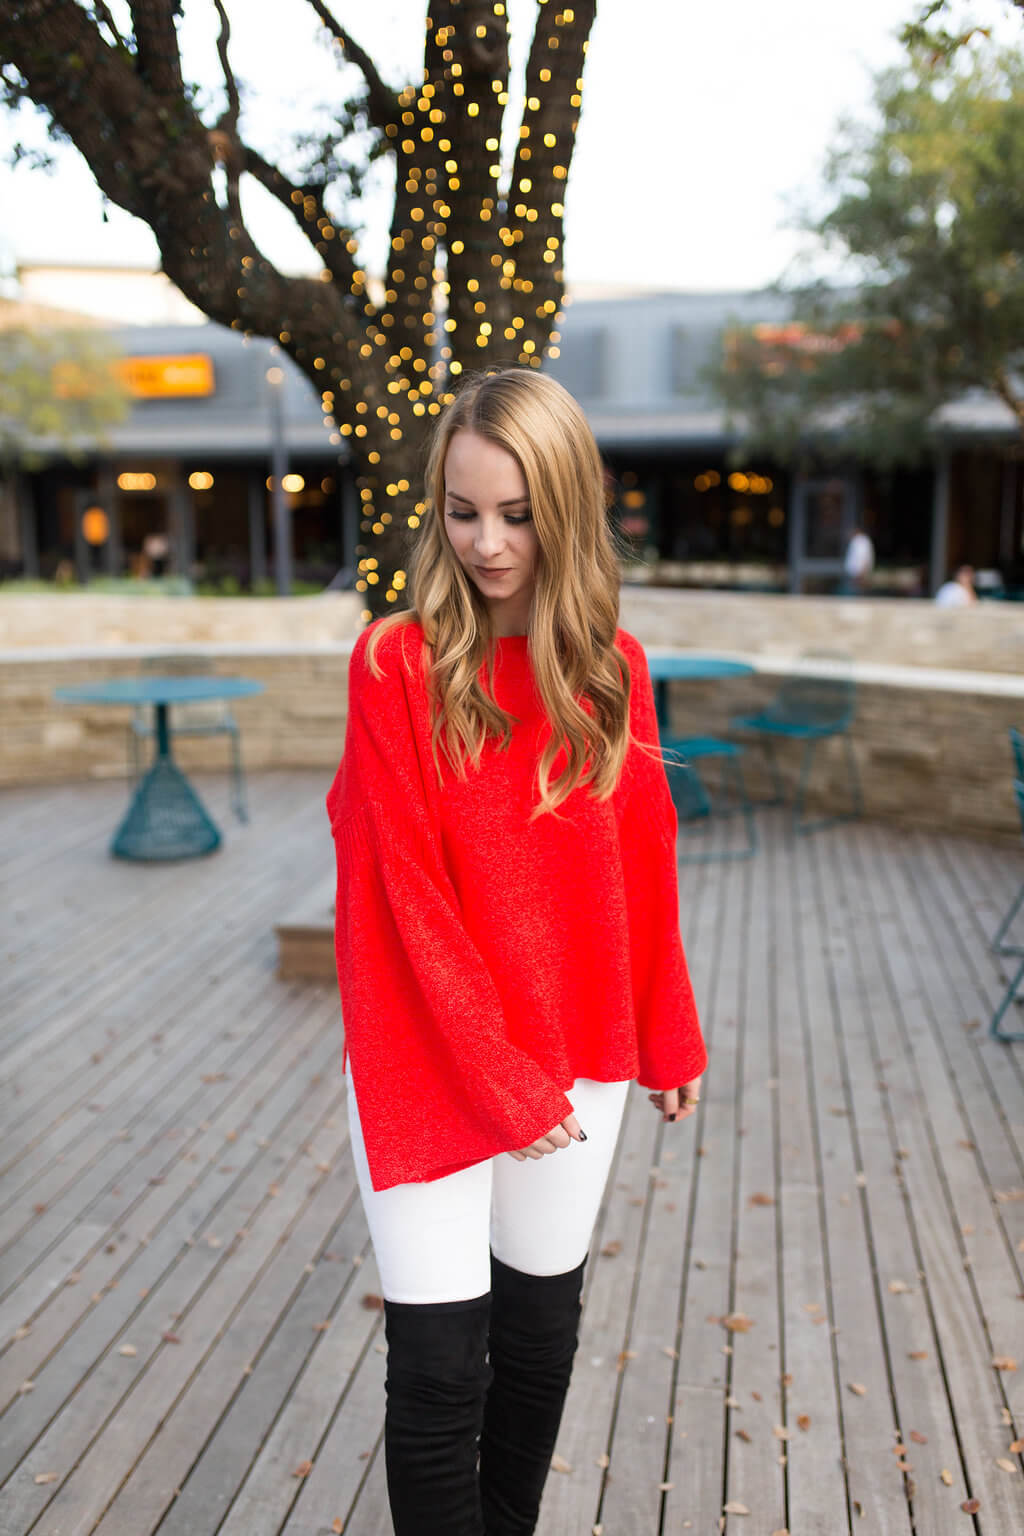 Bell sleeve sweater for every occasion. The perfect holiday sweater for under $100 | The Blonder Life